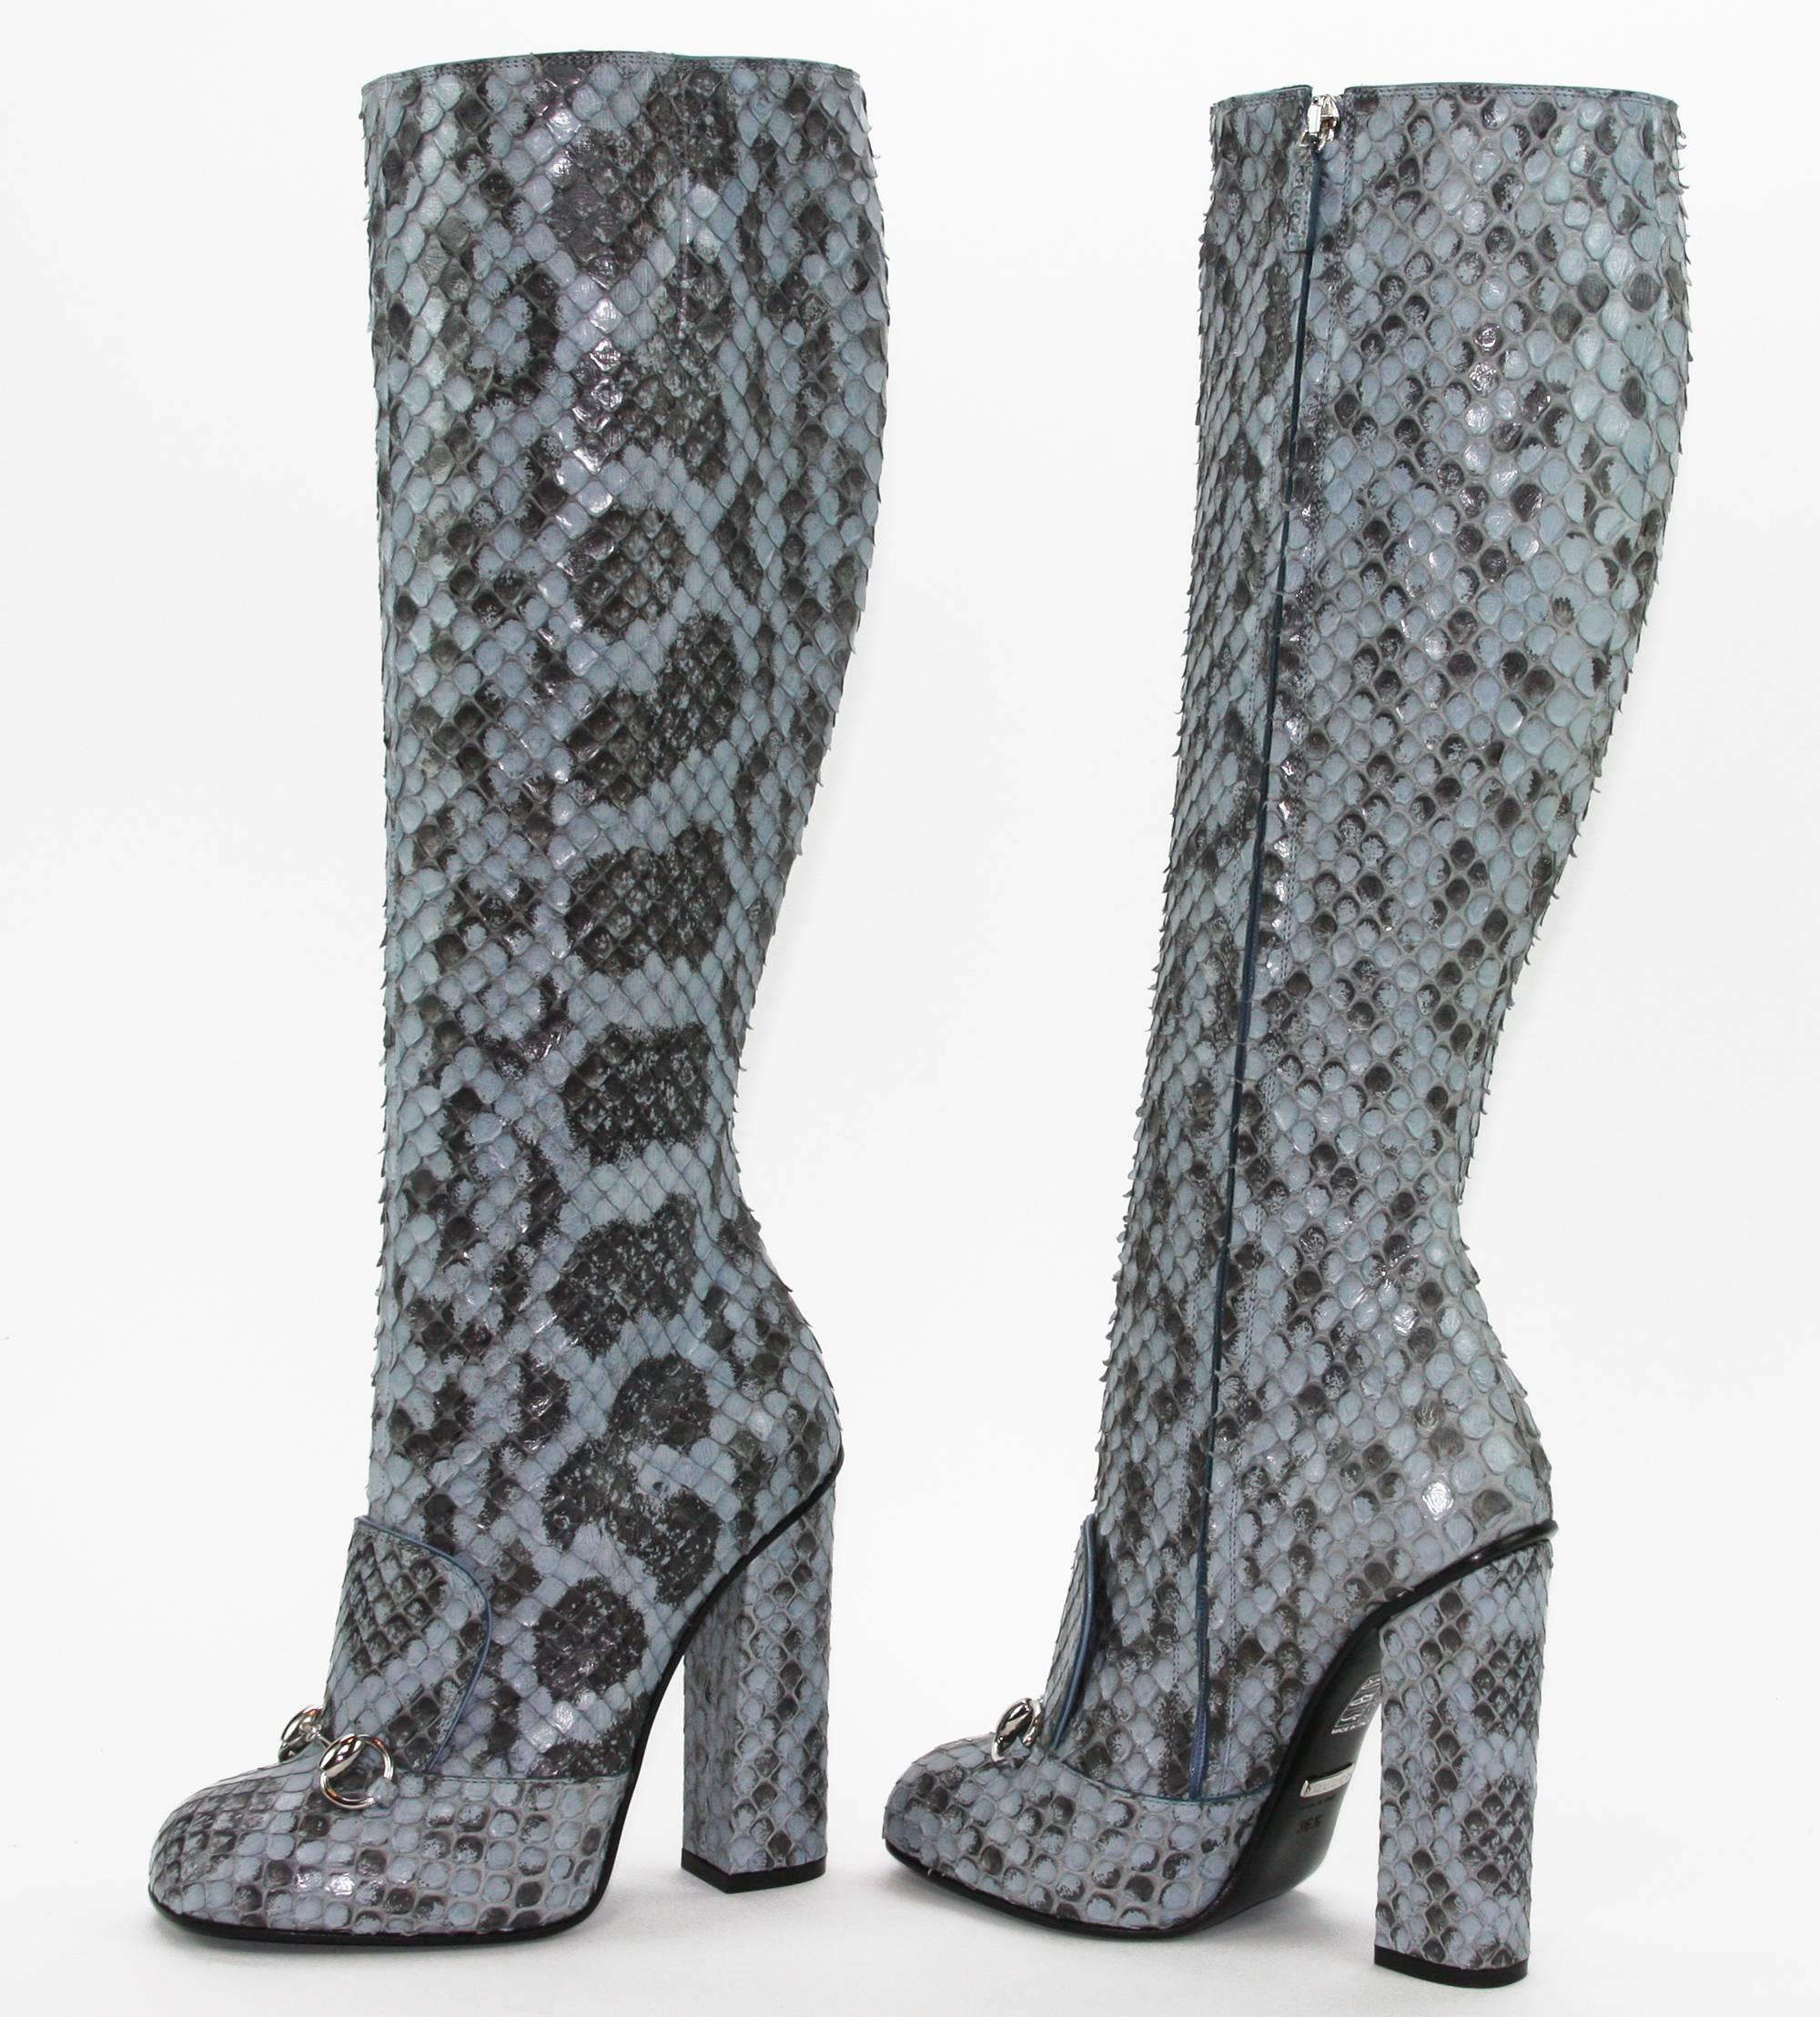 Cut Slim to Showcase Your Legs, the Season's Must-Have Boots Breathe Retro-Tinged Sophistication with Precious Candy-Colored Python and a Chic Stacked Heel.
 
New GUCCI PYTHON Knee Height Boots
Italian Size 36.5 – US 7
Designer Color -